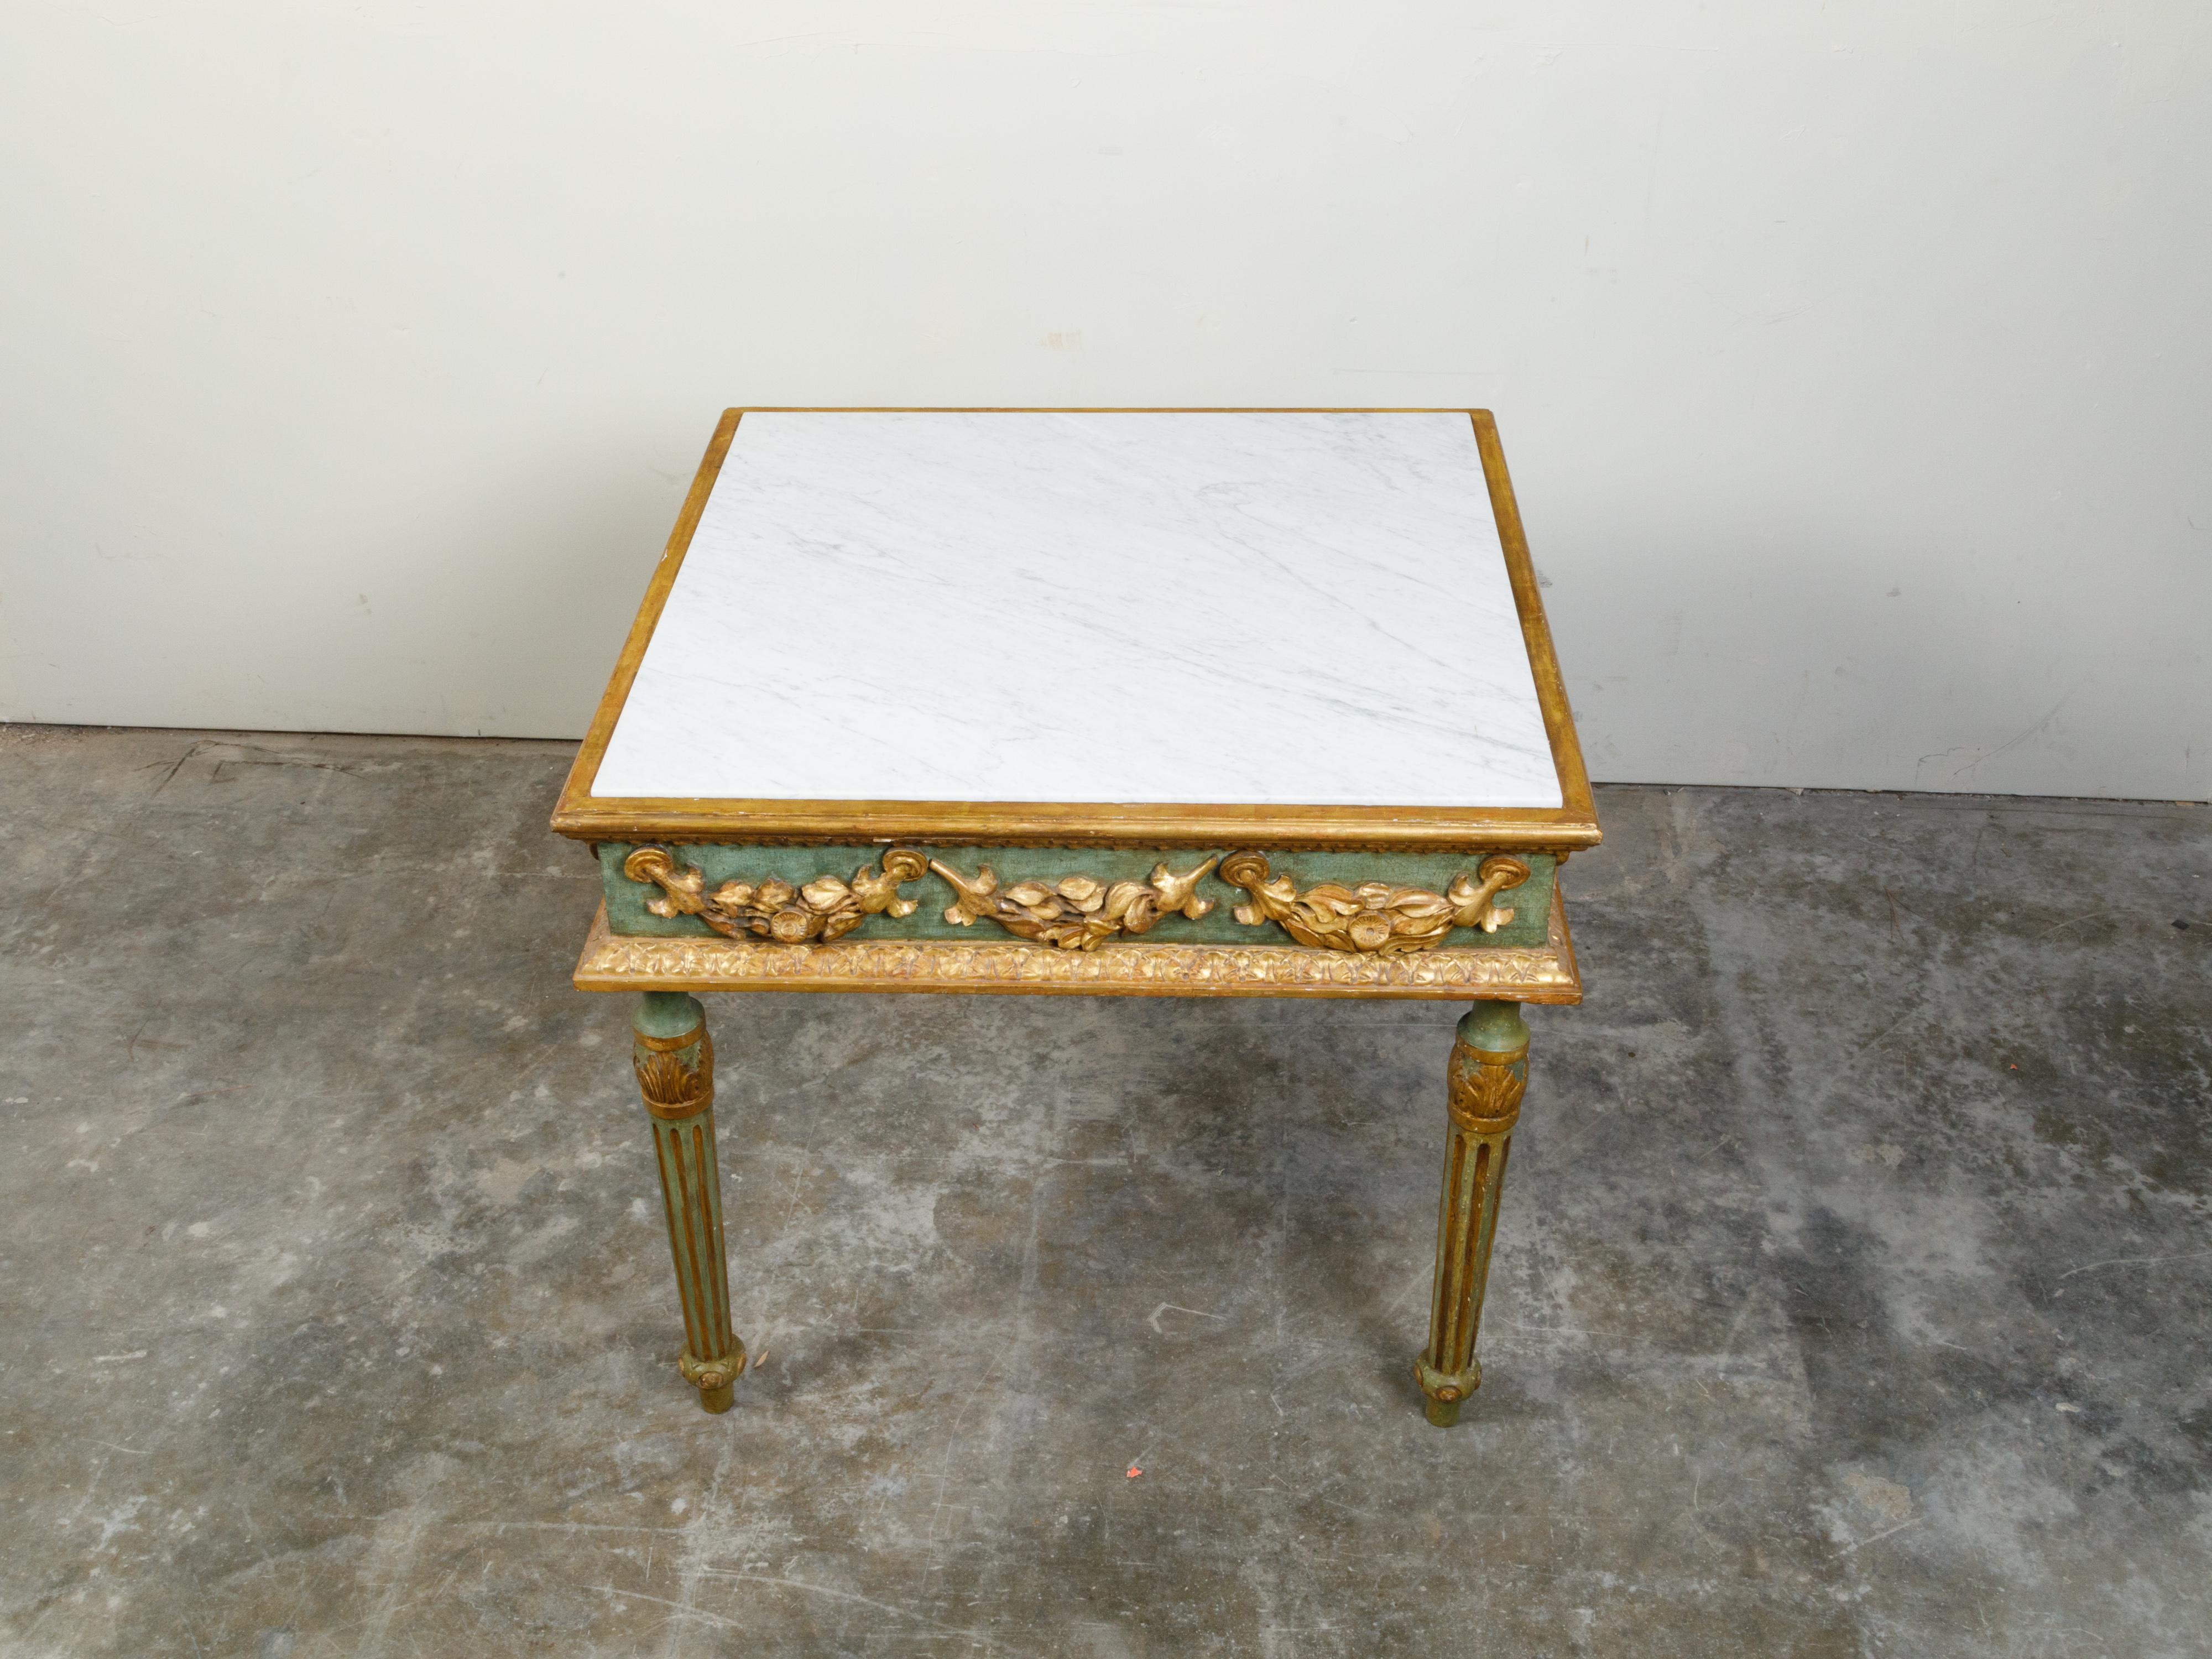 Italian Neoclassical Period 18th Century Center Table with Carved Gilt Garlands In Good Condition For Sale In Atlanta, GA